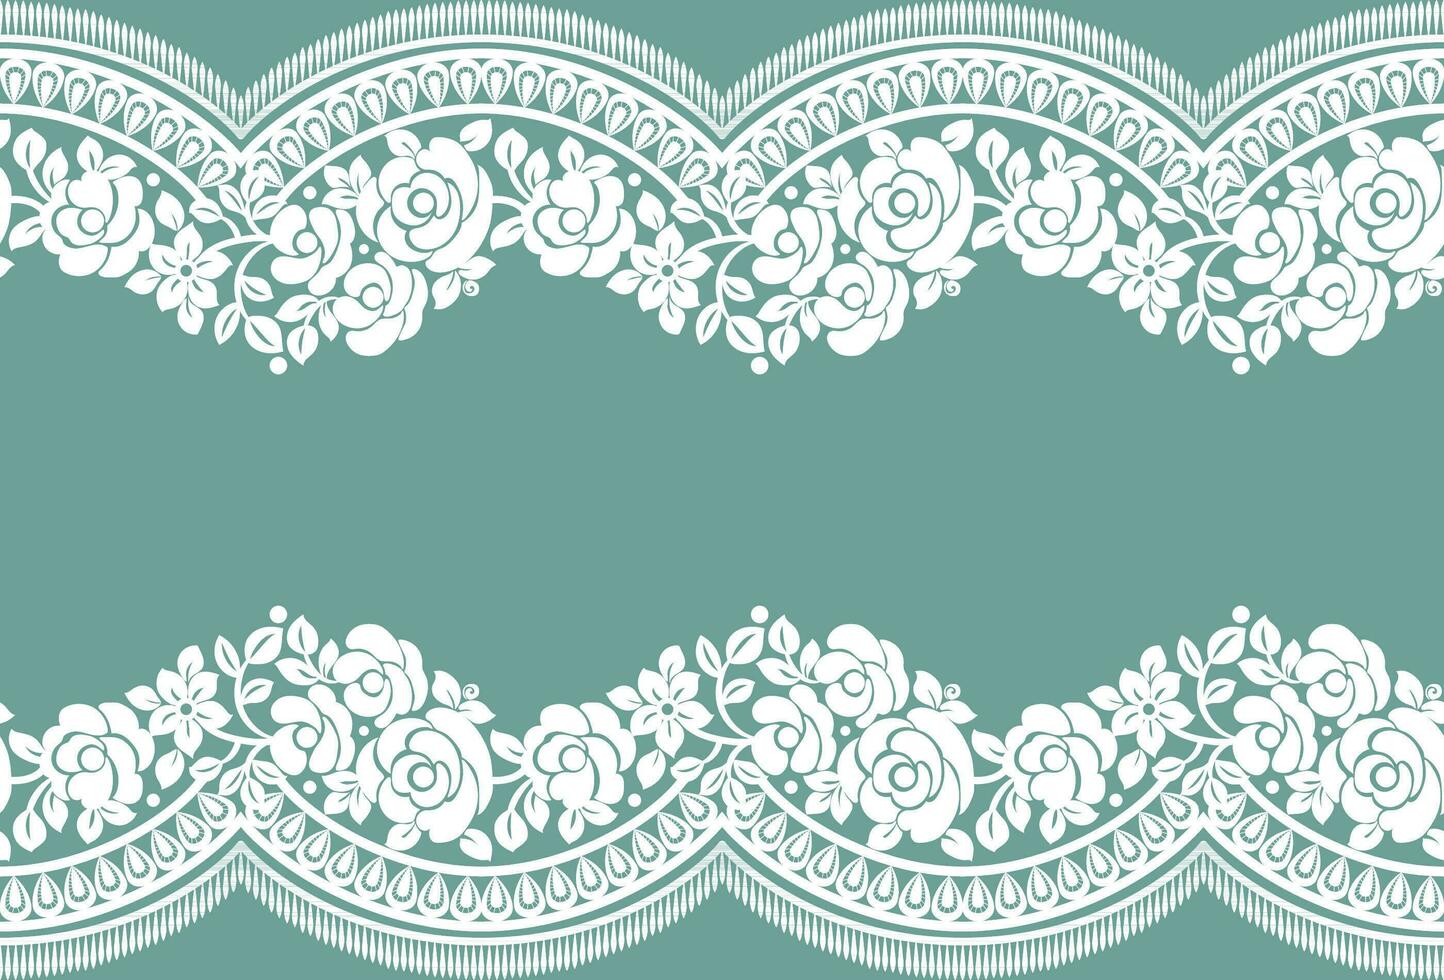 Seamless lace pattern, flower vintage vector background.